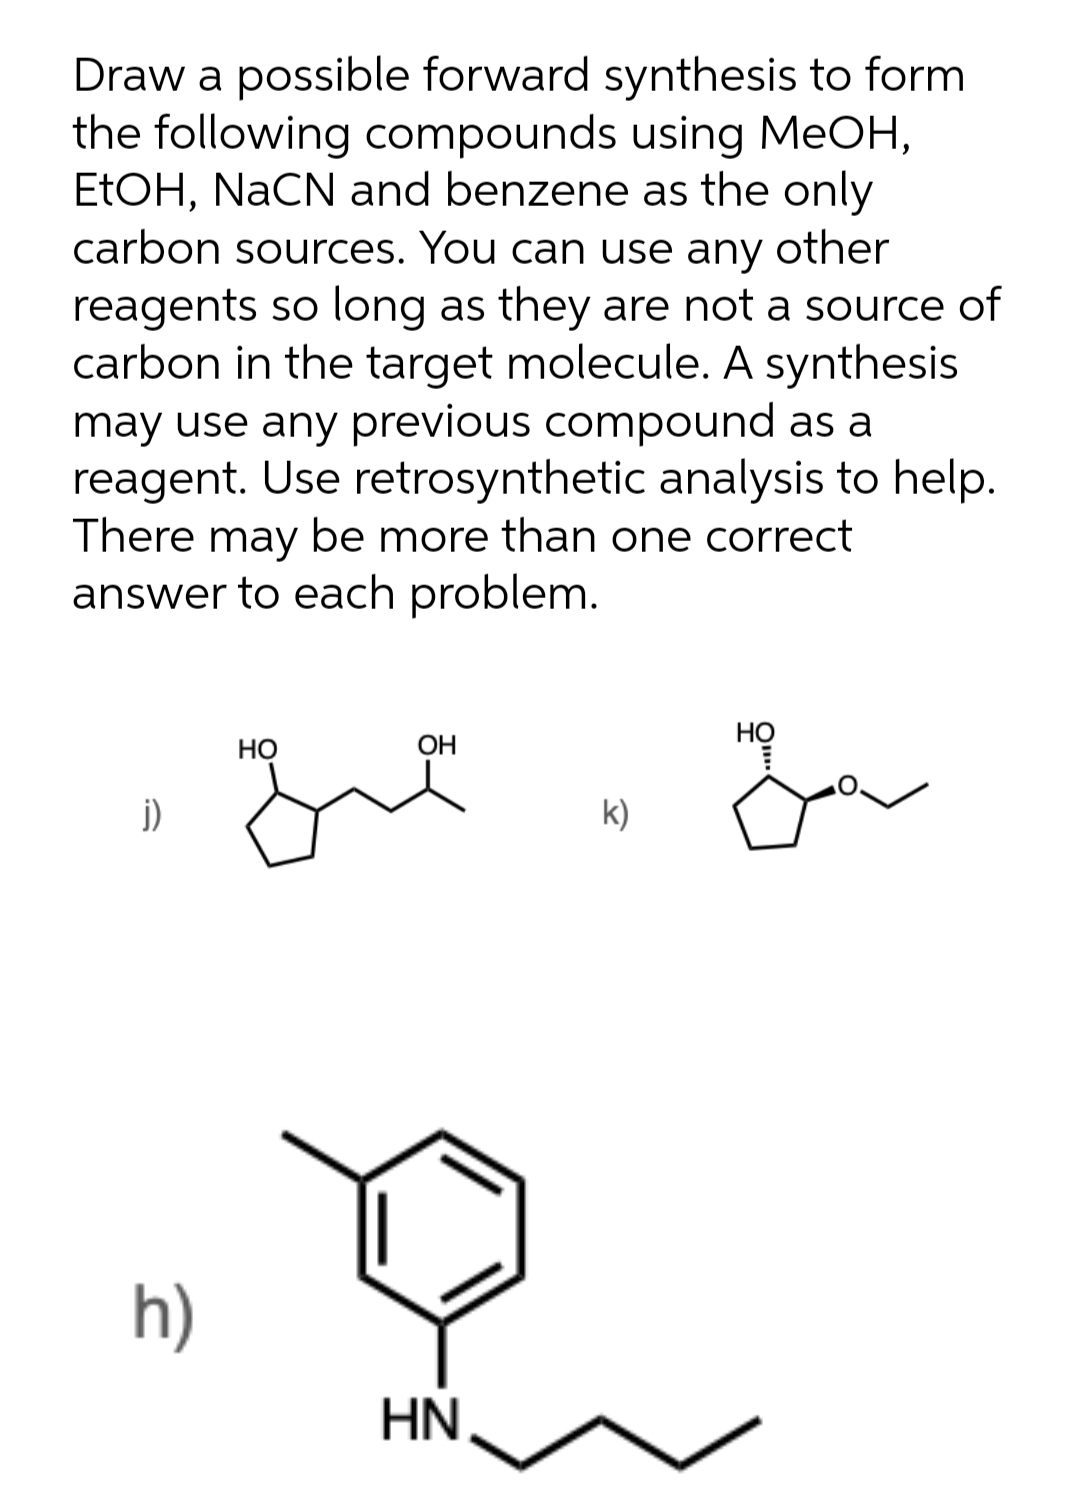 Draw a possible forward synthesis to form
the following compounds using MeOH,
ETOH, NaCN and benzene as the only
carbon sources. You can use any other
reagents so long as they are not a source of
carbon in the target molecule. A synthesis
may use any previous compound as a
reagent. Use retrosynthetic analysis to help.
There may be more than one correct
answer to each problem.
НО
Но
OH
j)
k)
h)
HN
